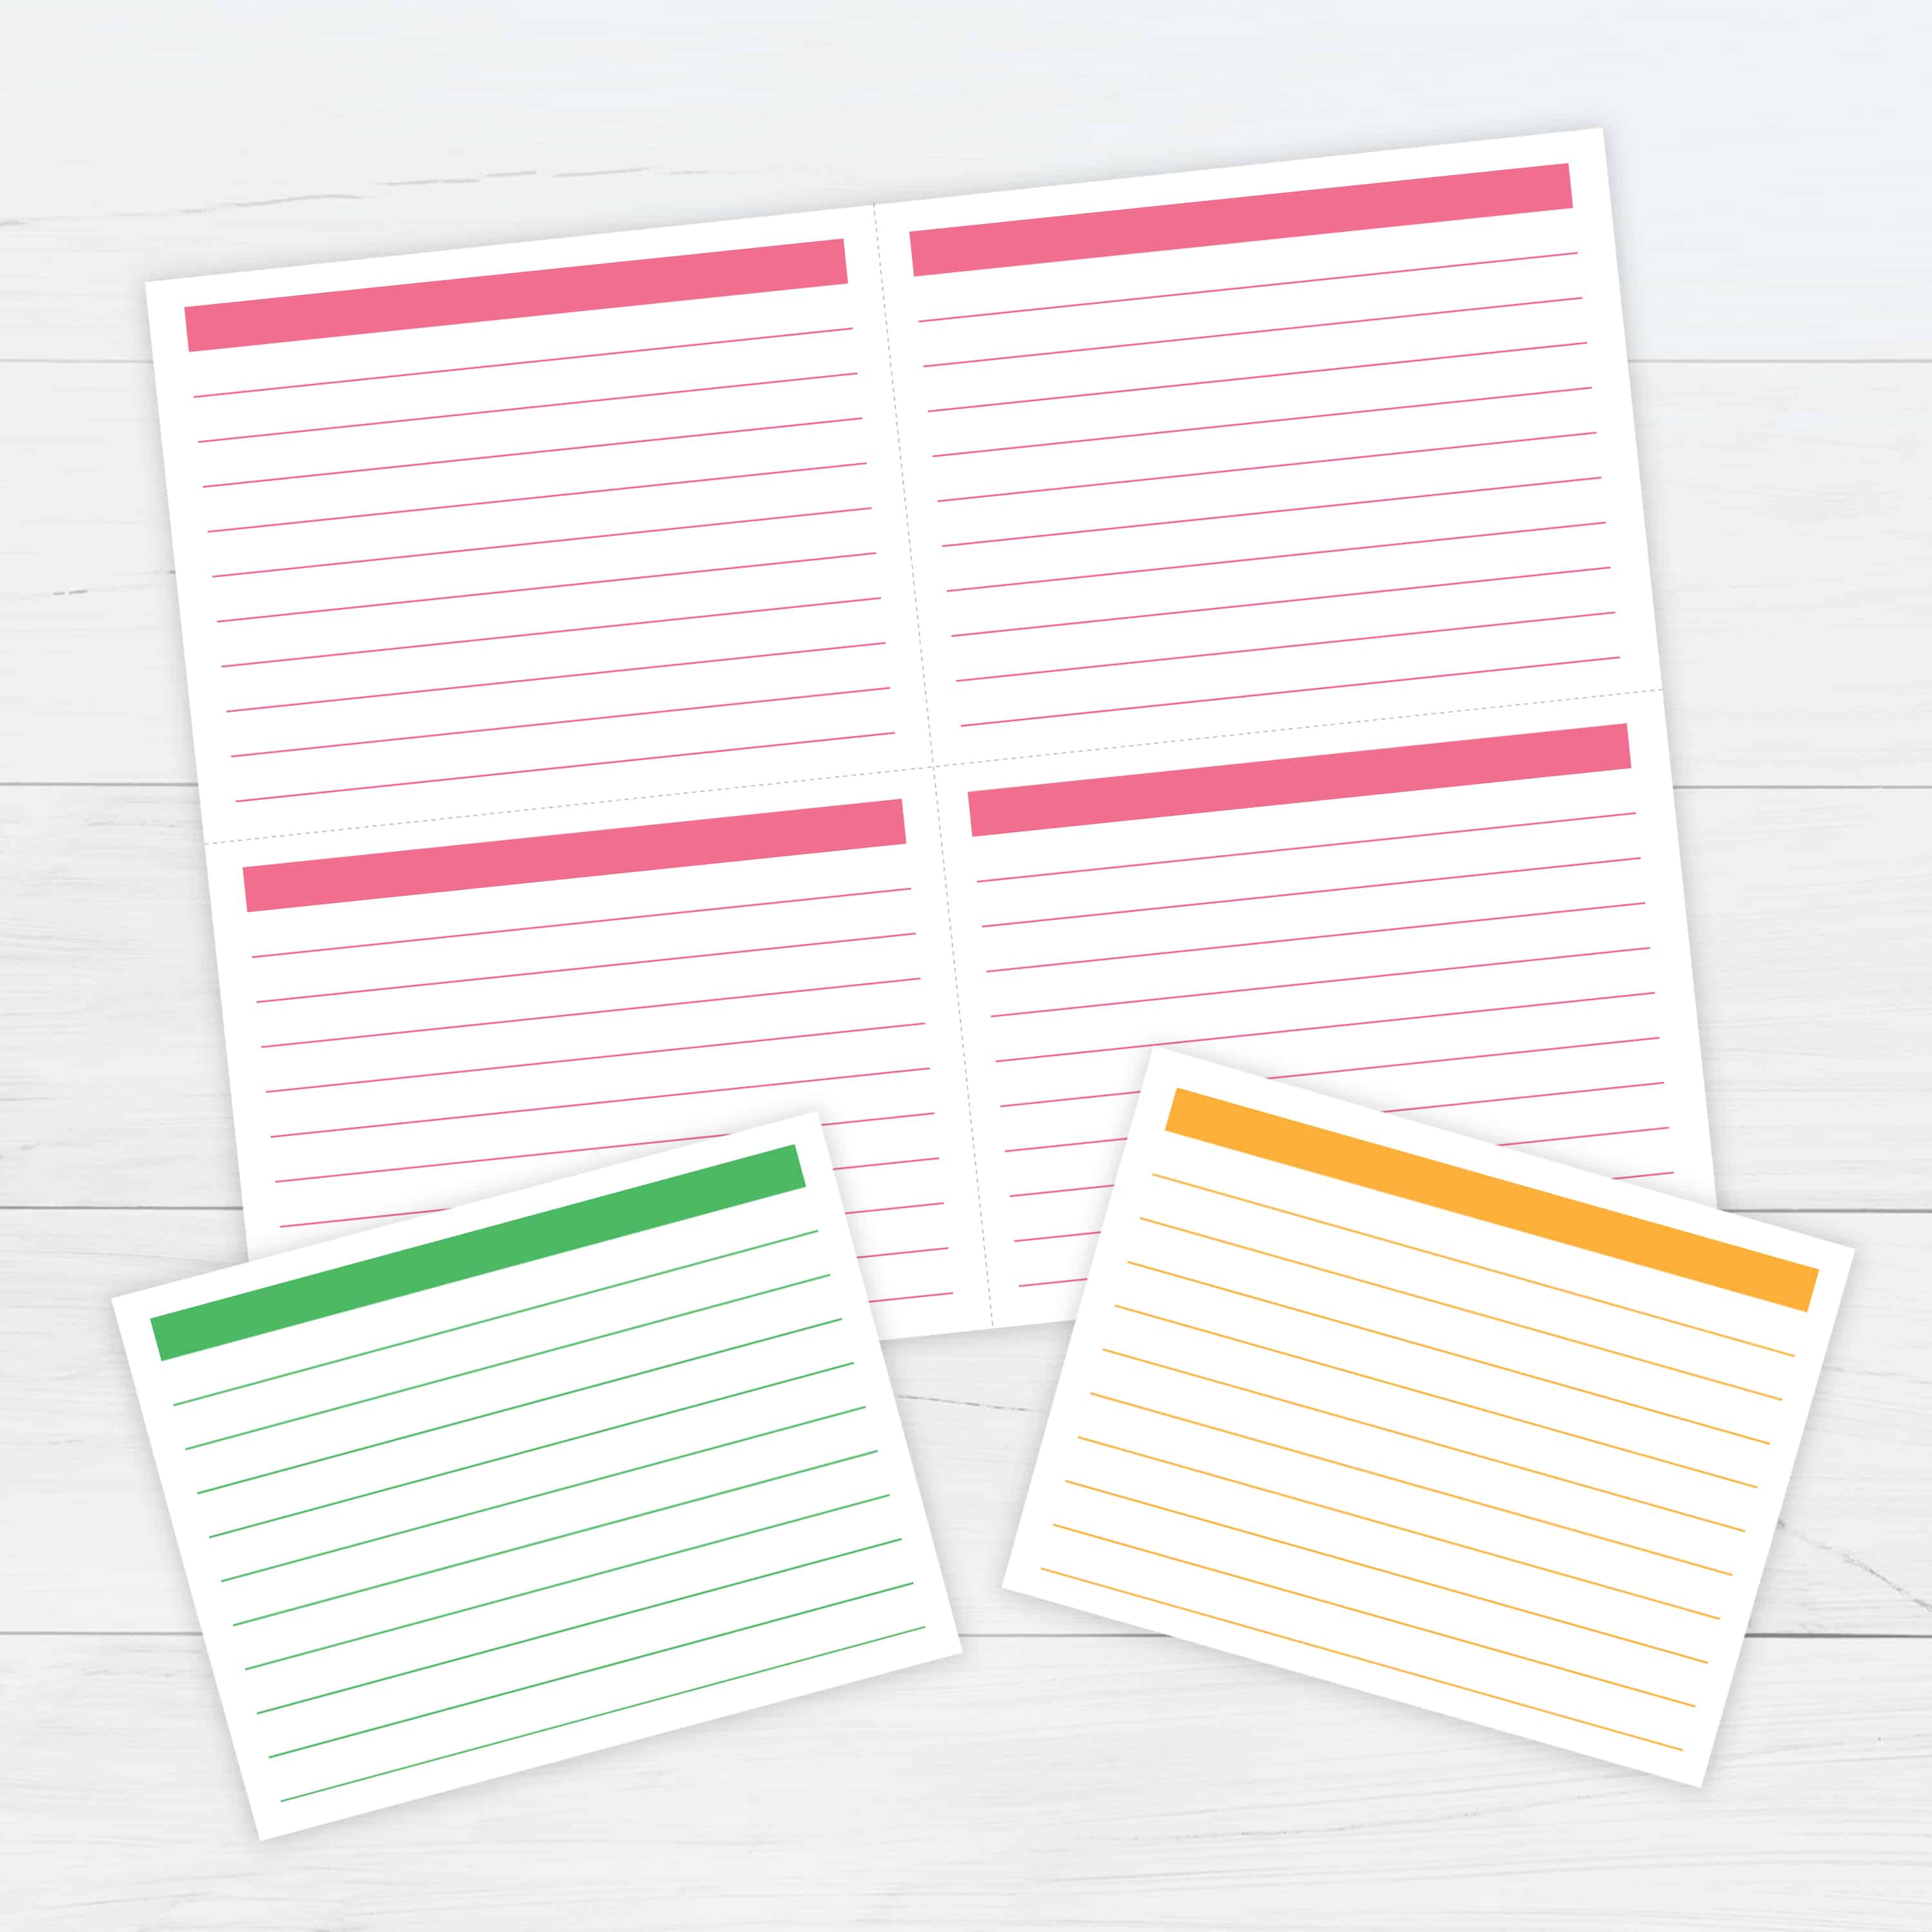 5 By 8 Index Card Template